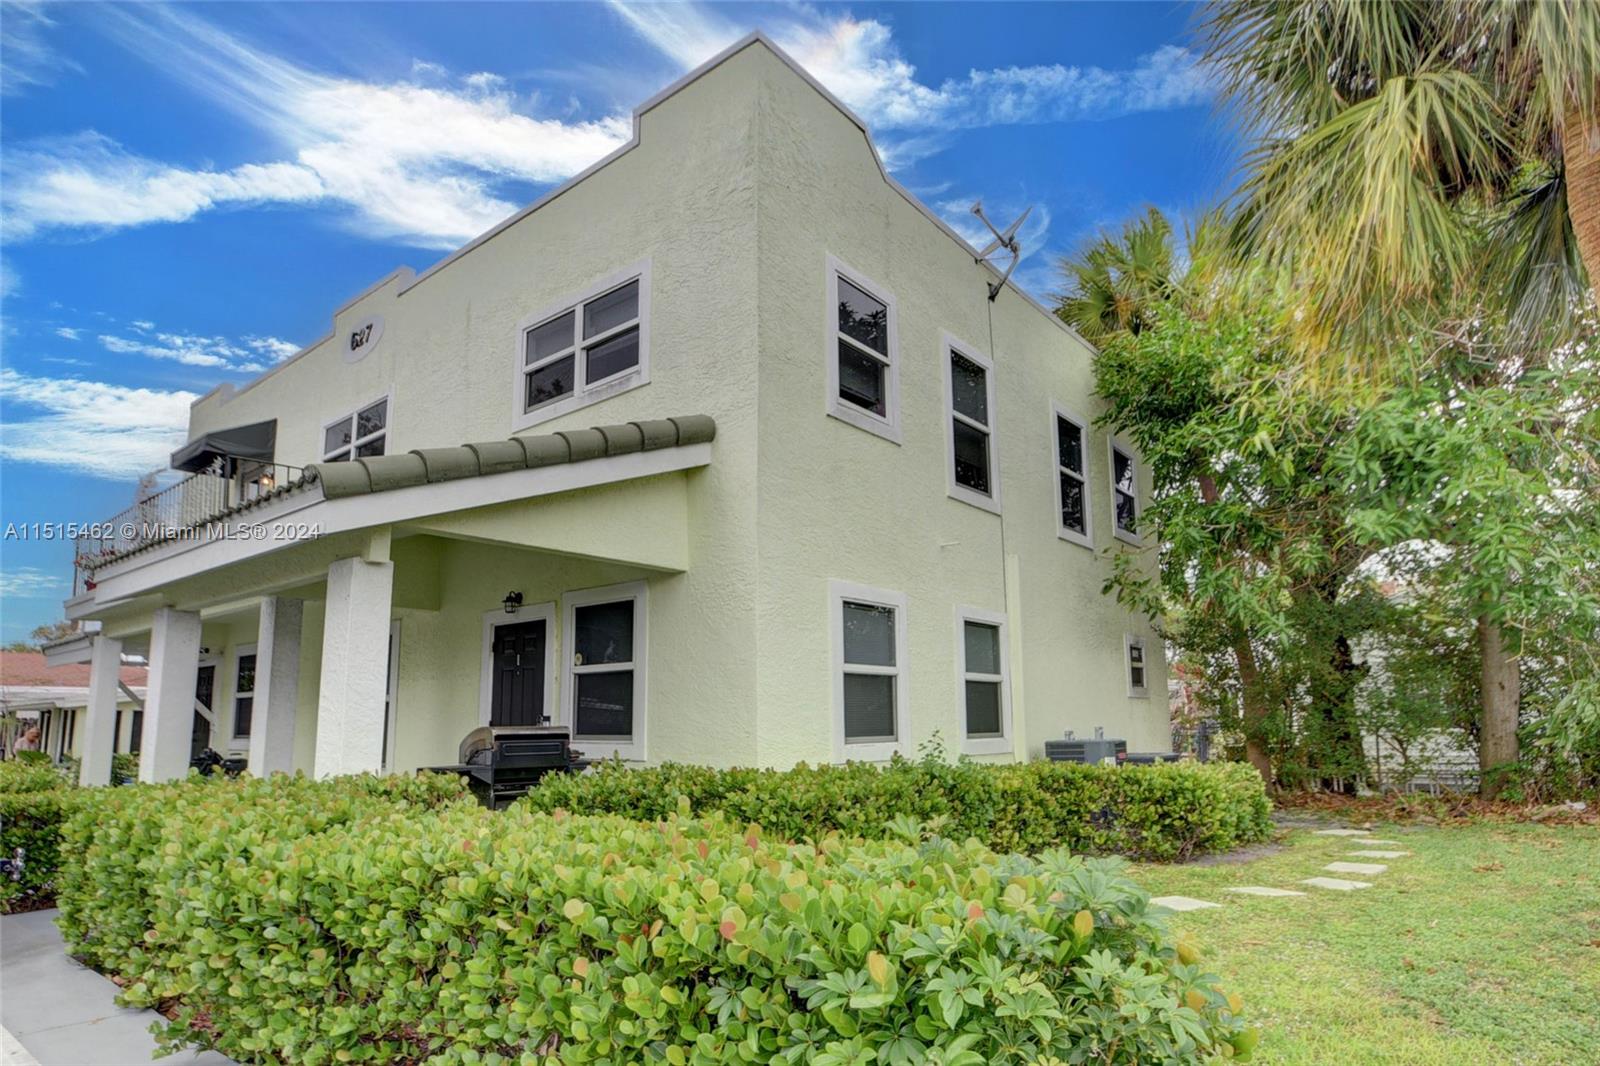 627 Bunker Rd, West Palm Beach, Florida, 33405, United States, ,Residential,For Sale,627 Bunker Rd,1461281